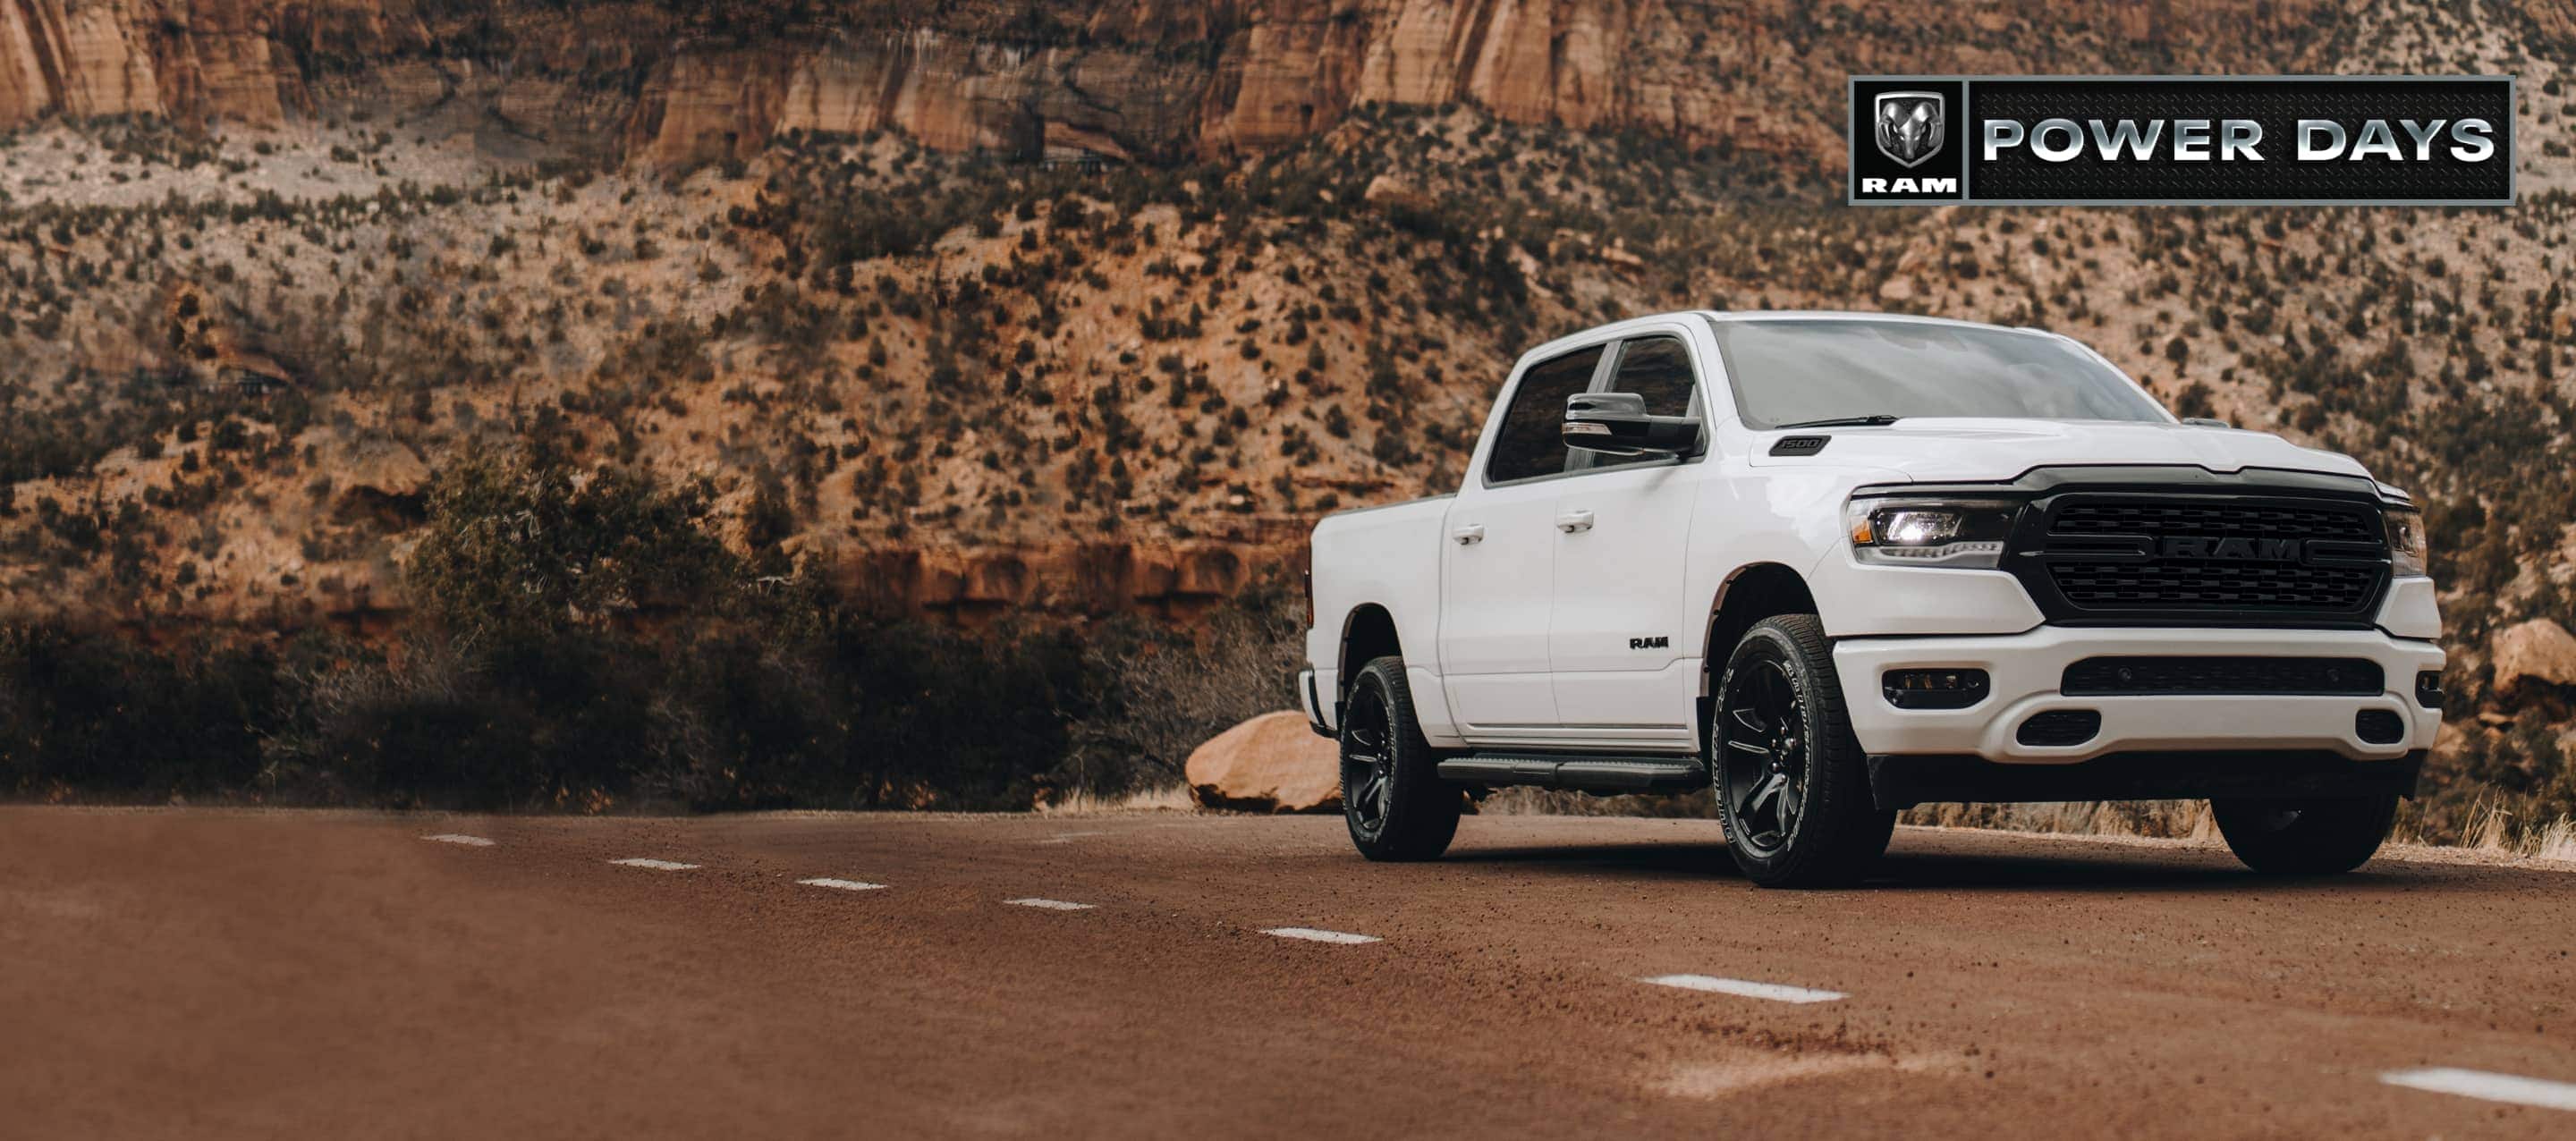 A white 2022 Ram 1500 Big Horn Crew Cab being driven on a mountain road. Ram Power Days.